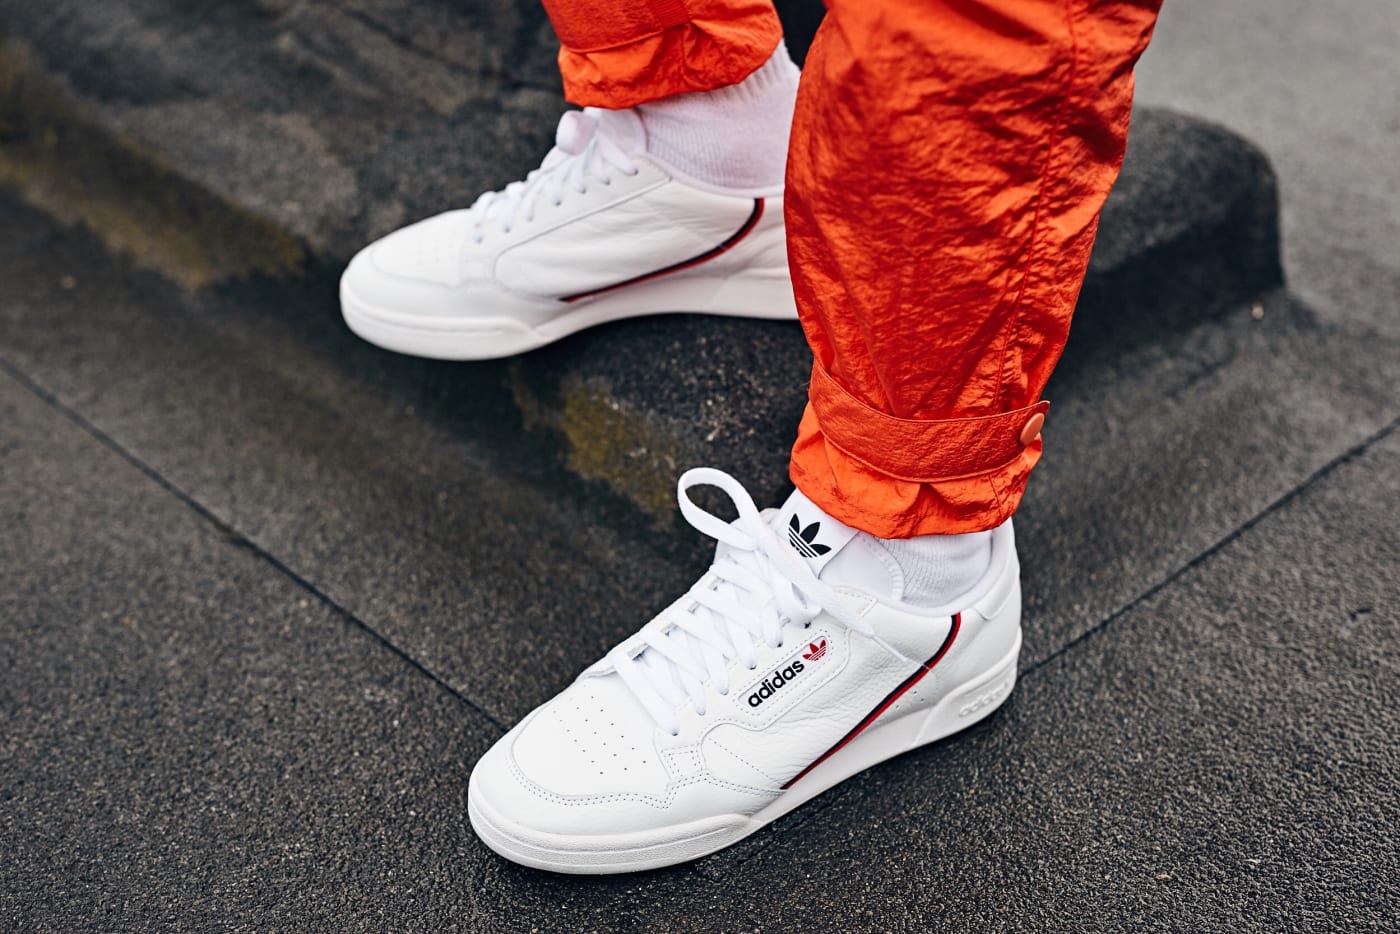 adidas Originals Revive the Ultra-Clean Continental 80 Silhouette for Spring/Summer | Complex UK